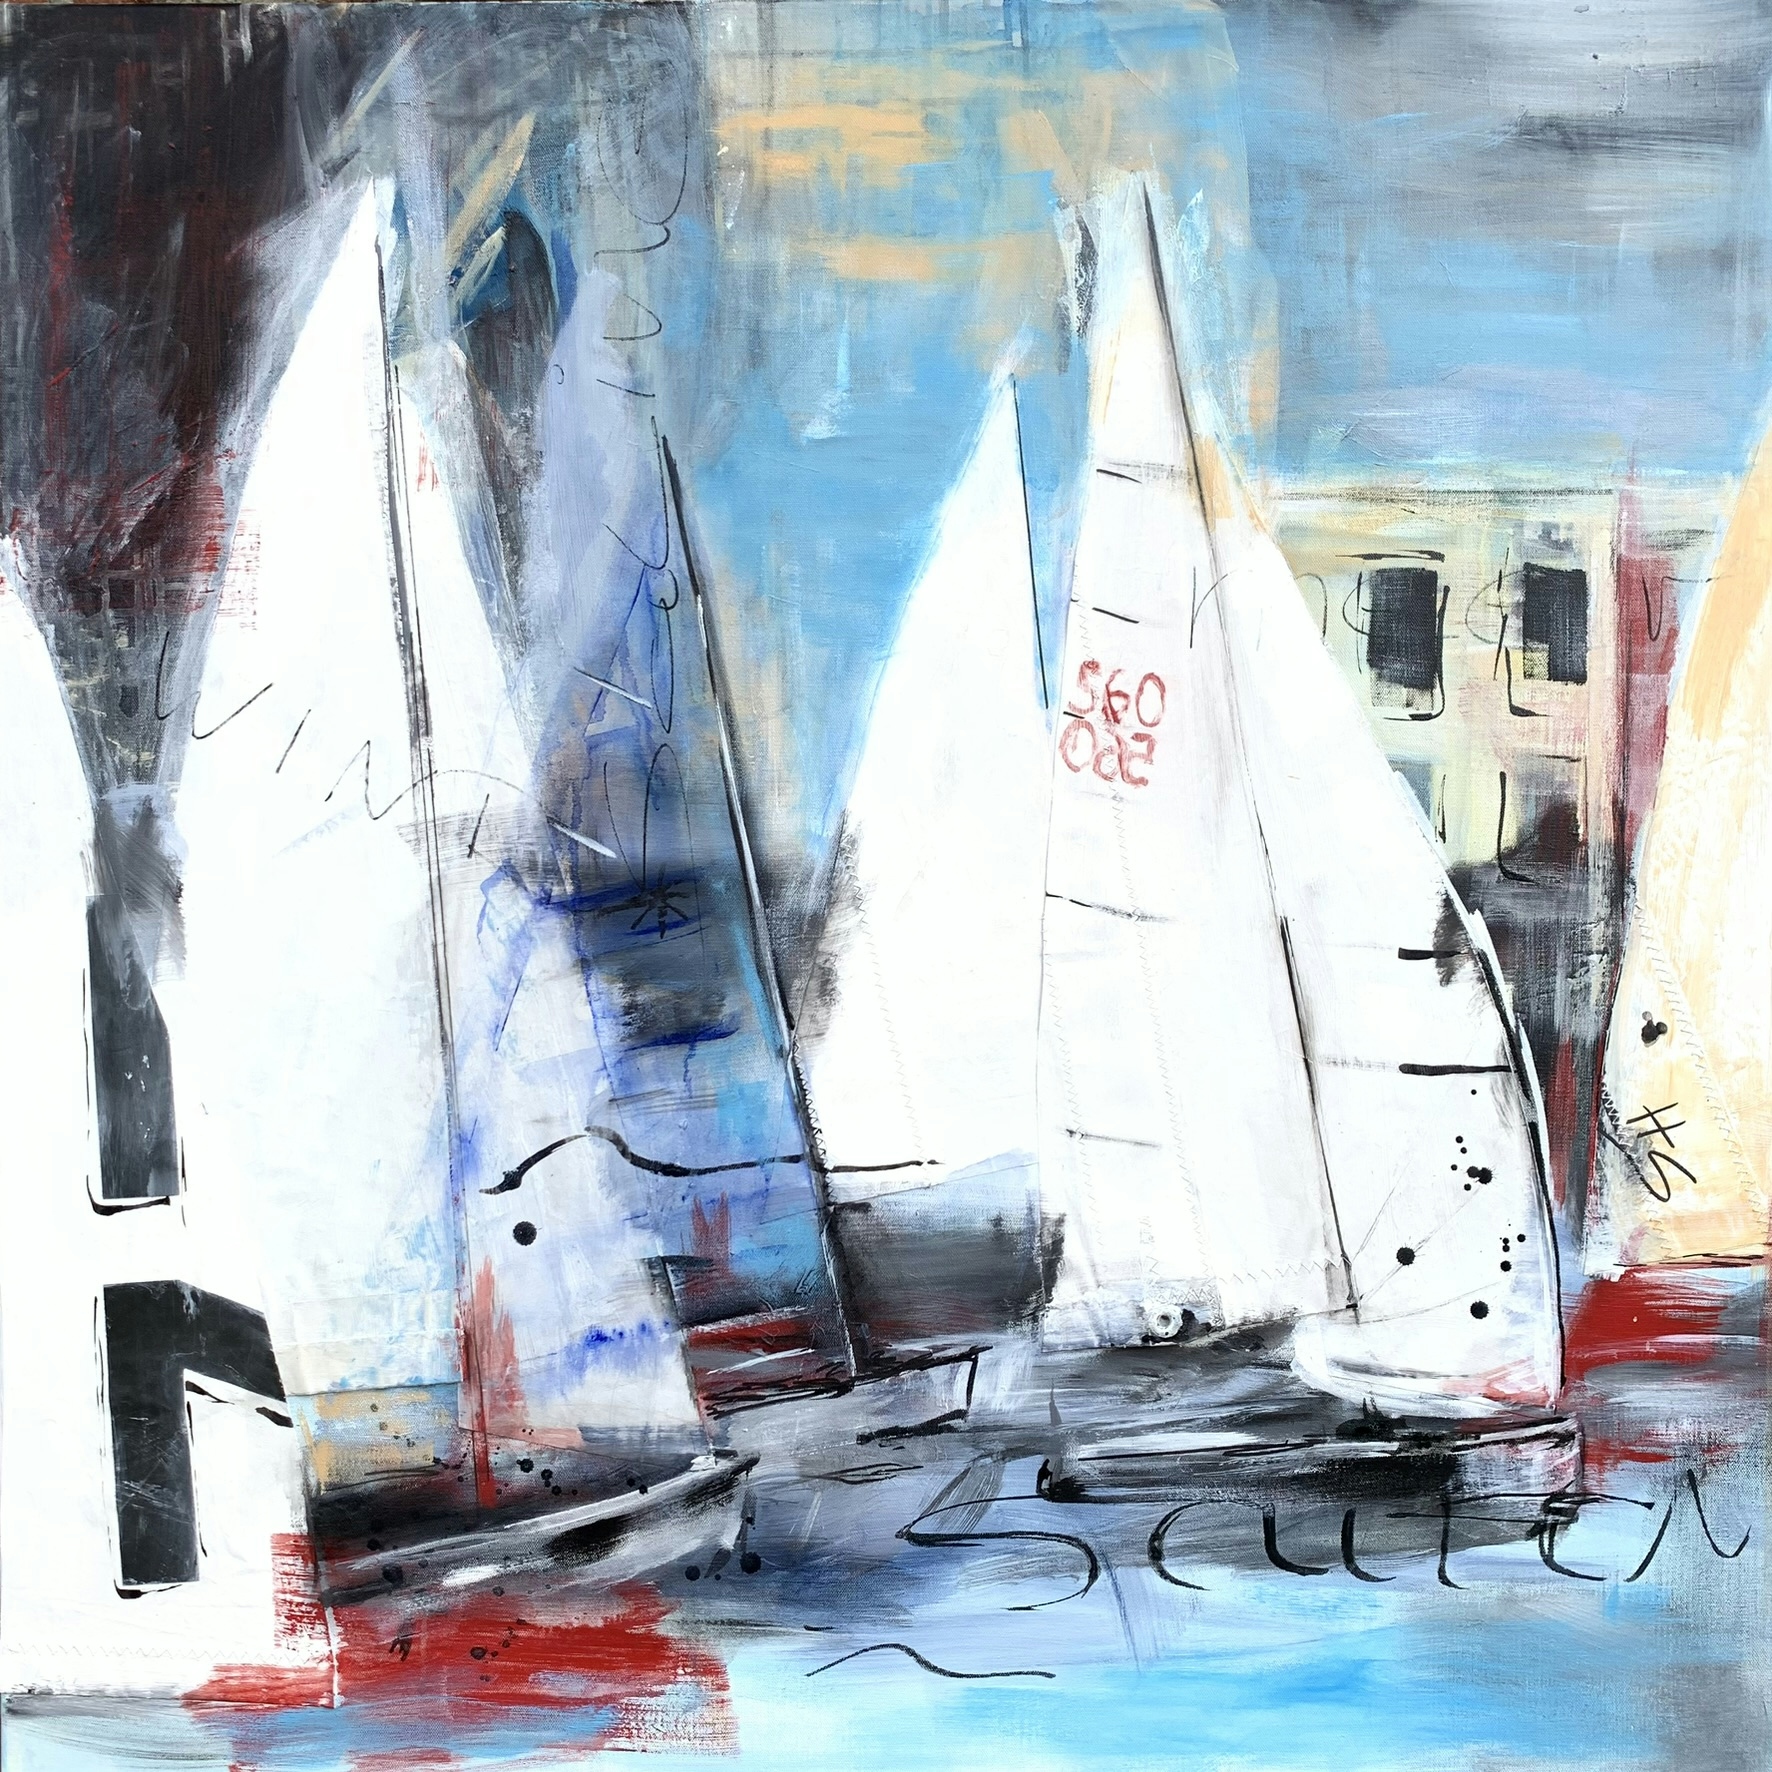 Artwork by Heike Schümann depicts abstractly rendered sailboats in front of buildings